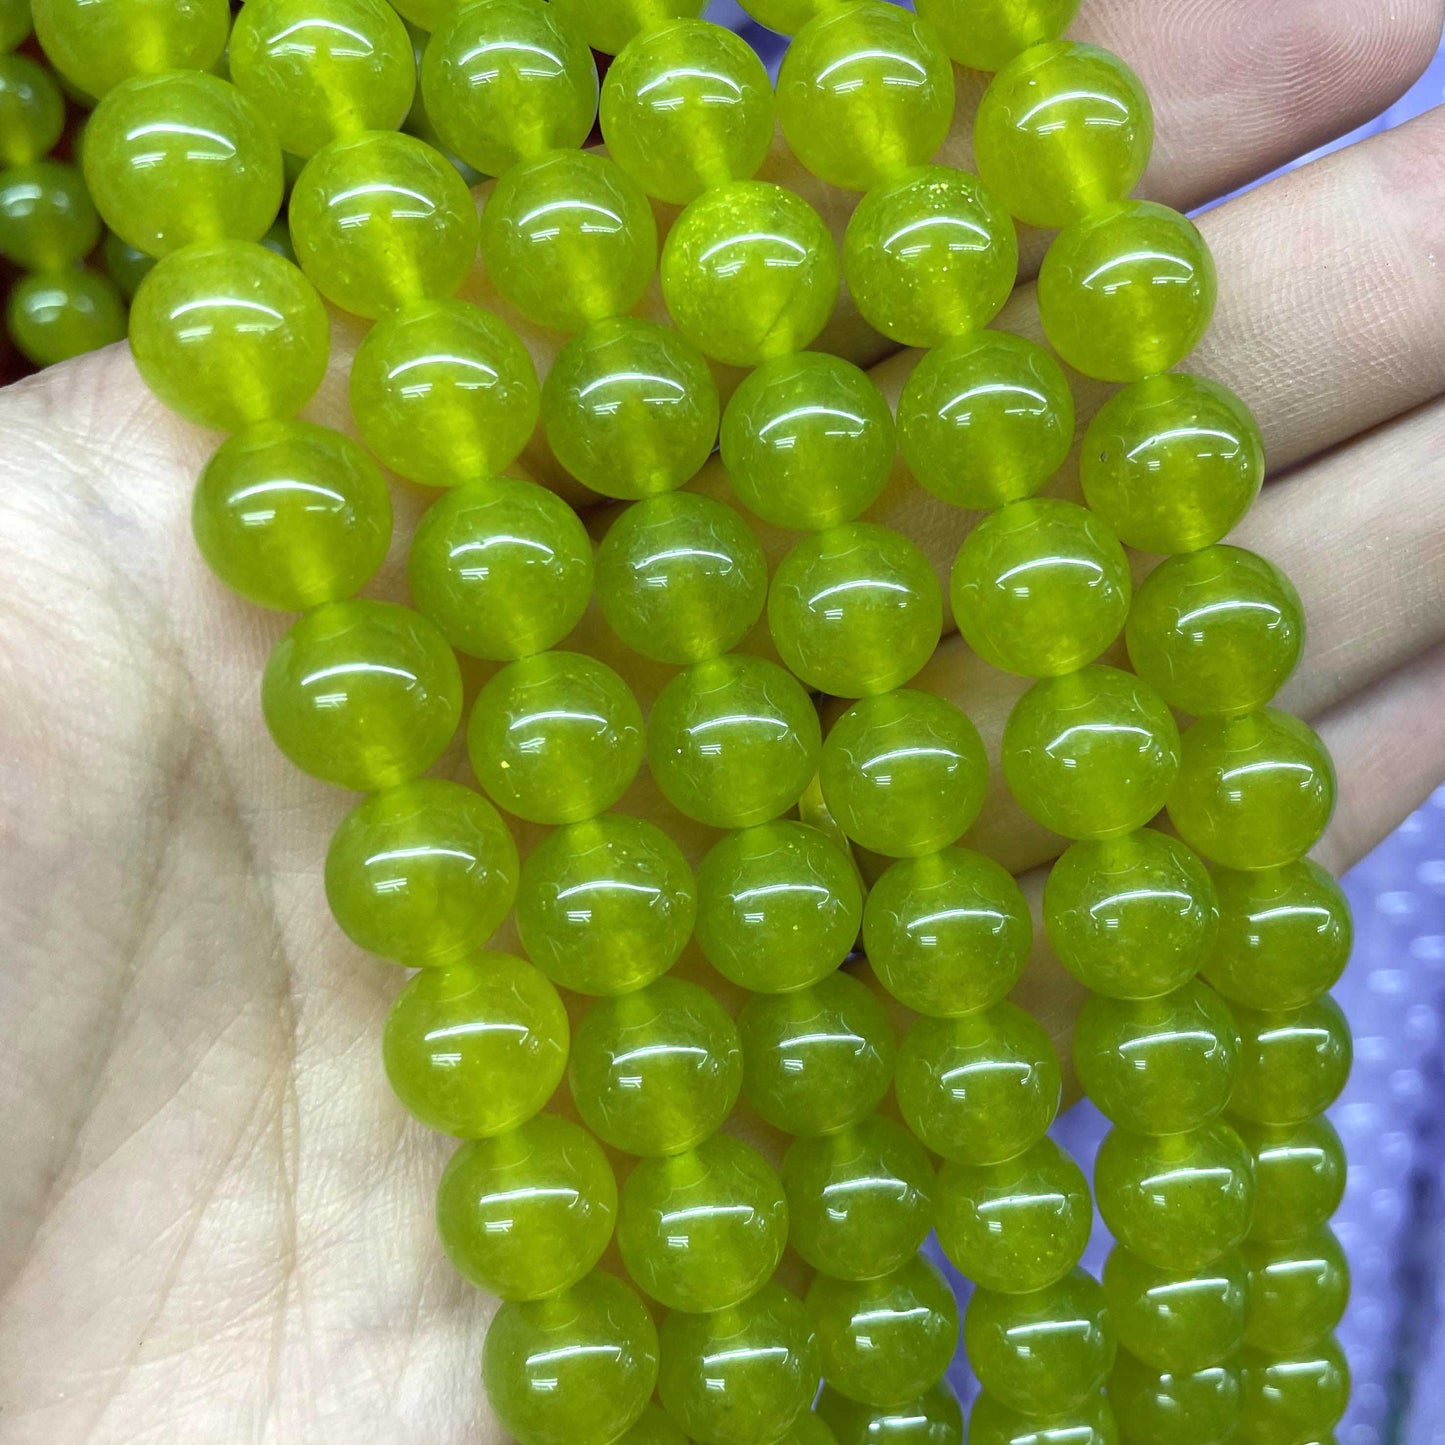 Natural Stone Round Colorful Jades Agates Loose Spacer